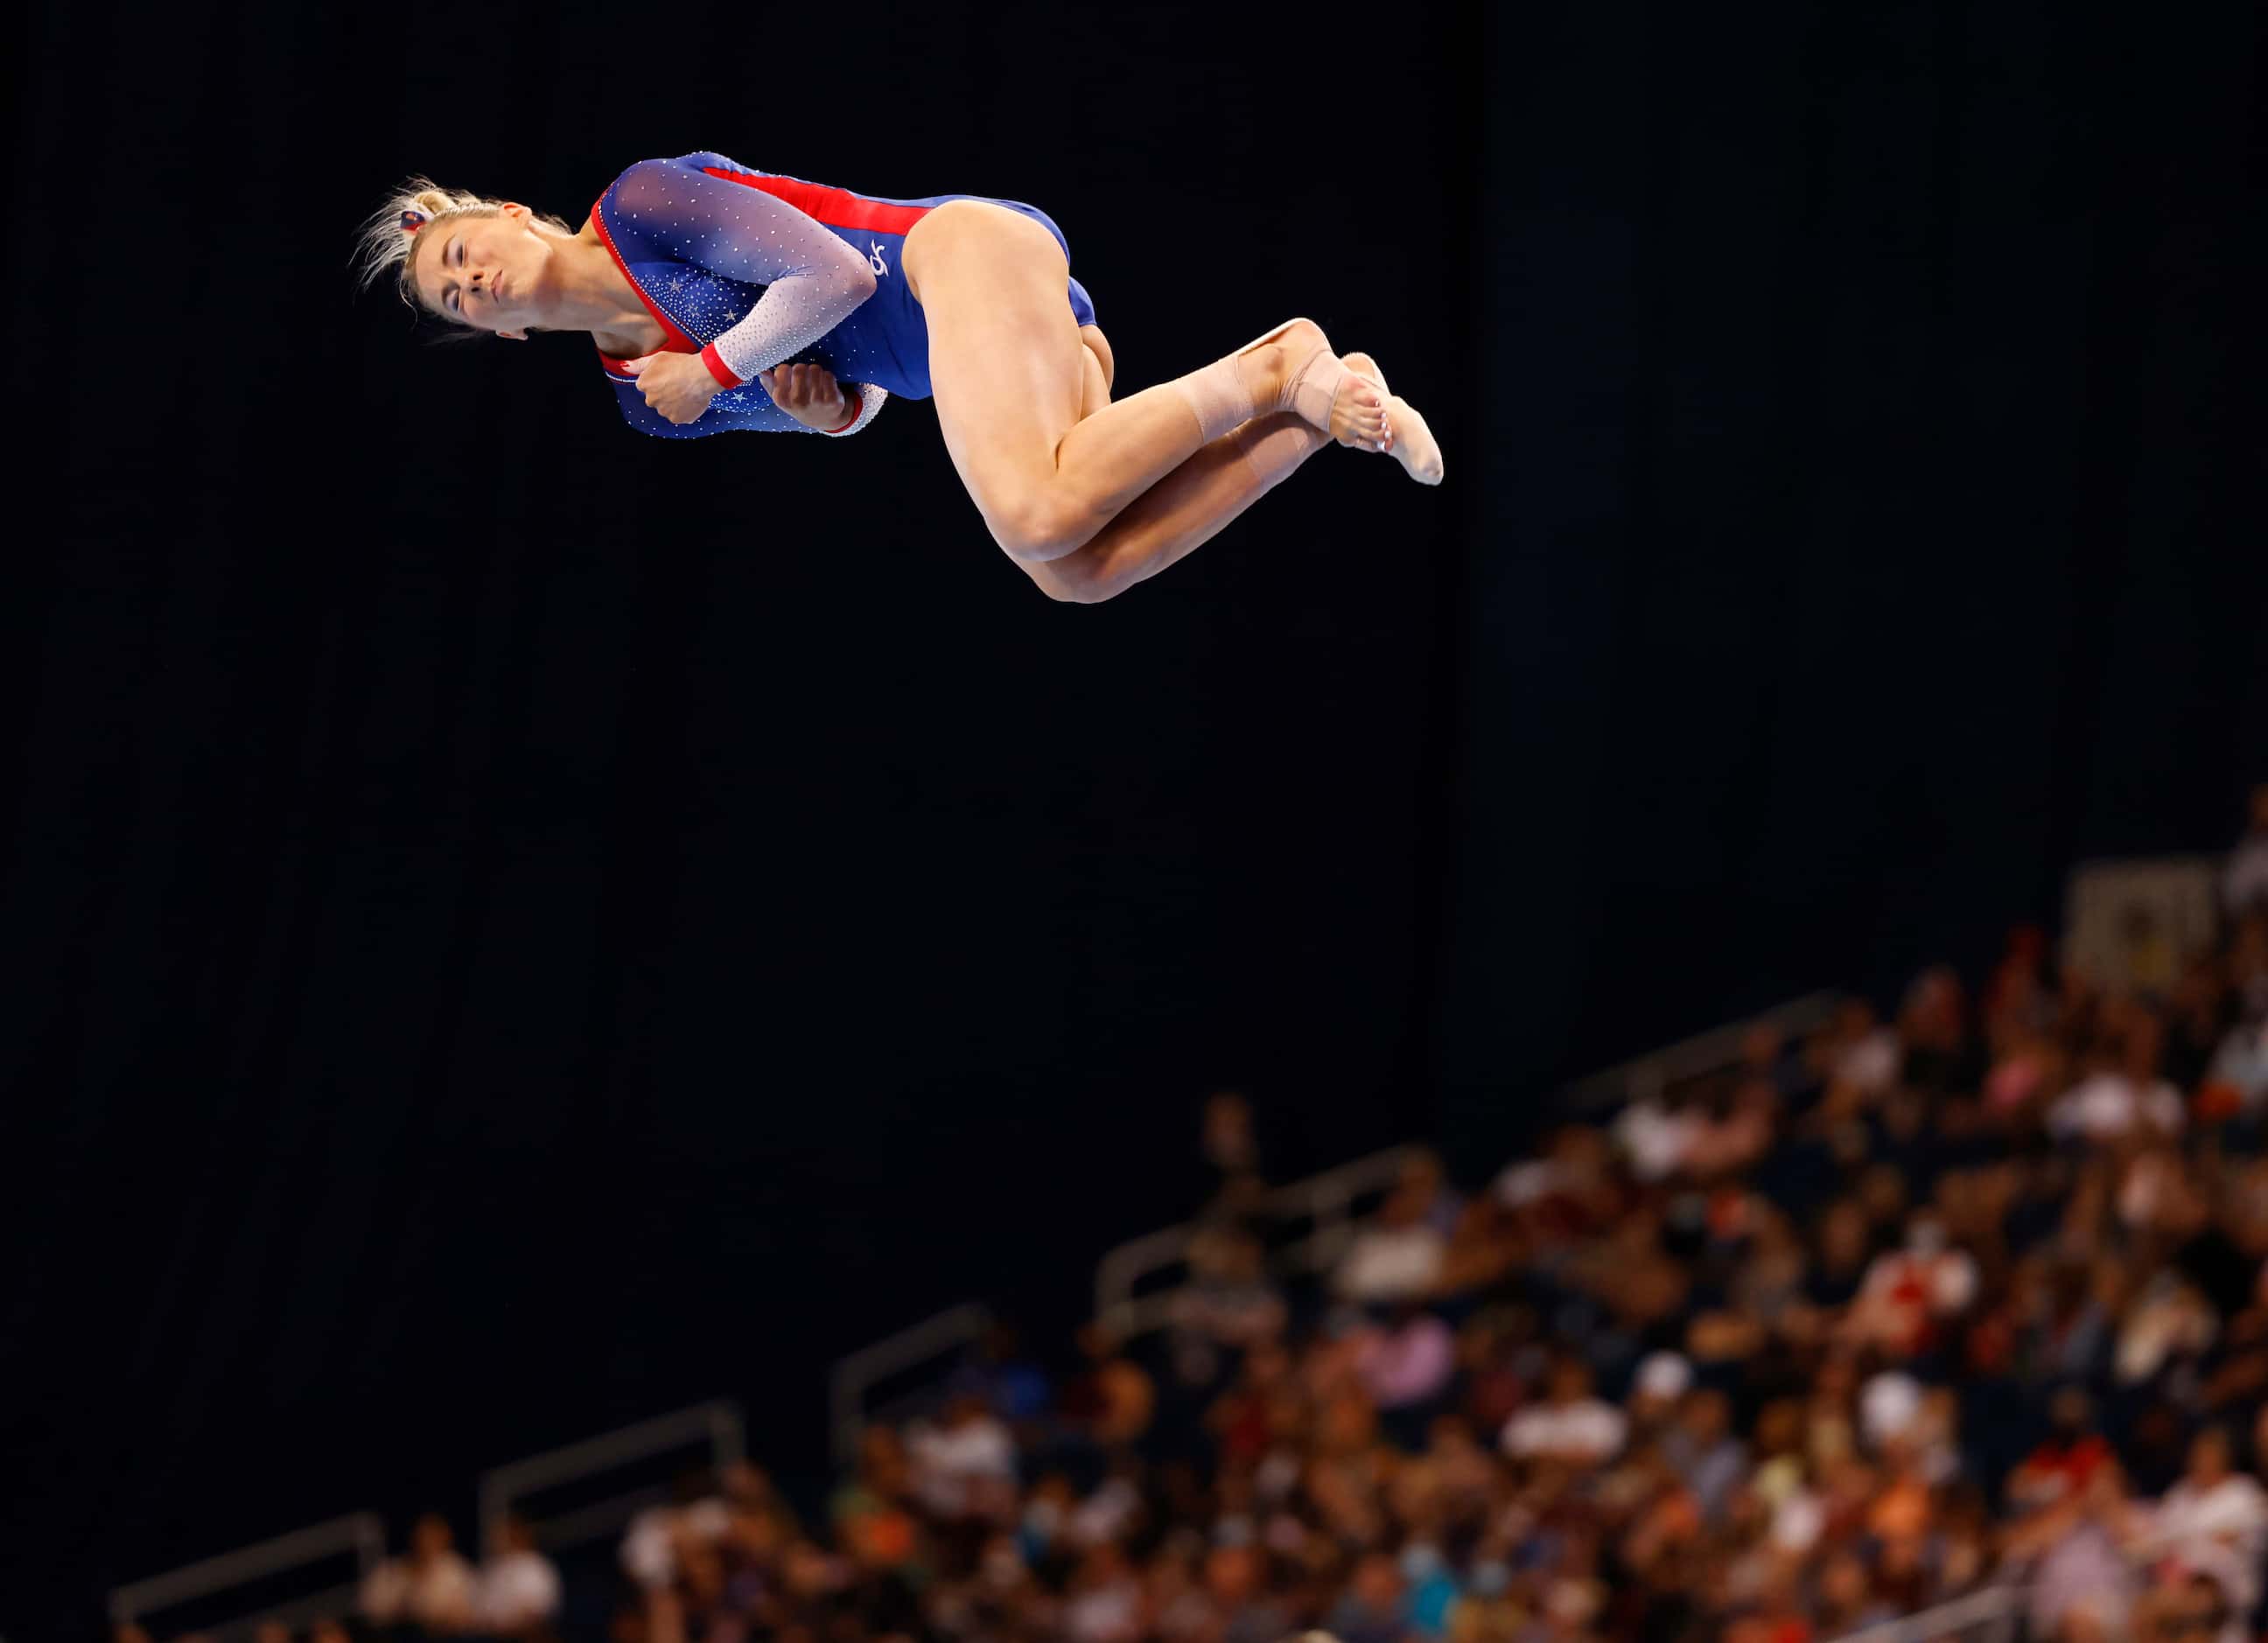 MyKayla Skinner competes in the floor exercise during day 2 of the women's 2021 U.S. Olympic...